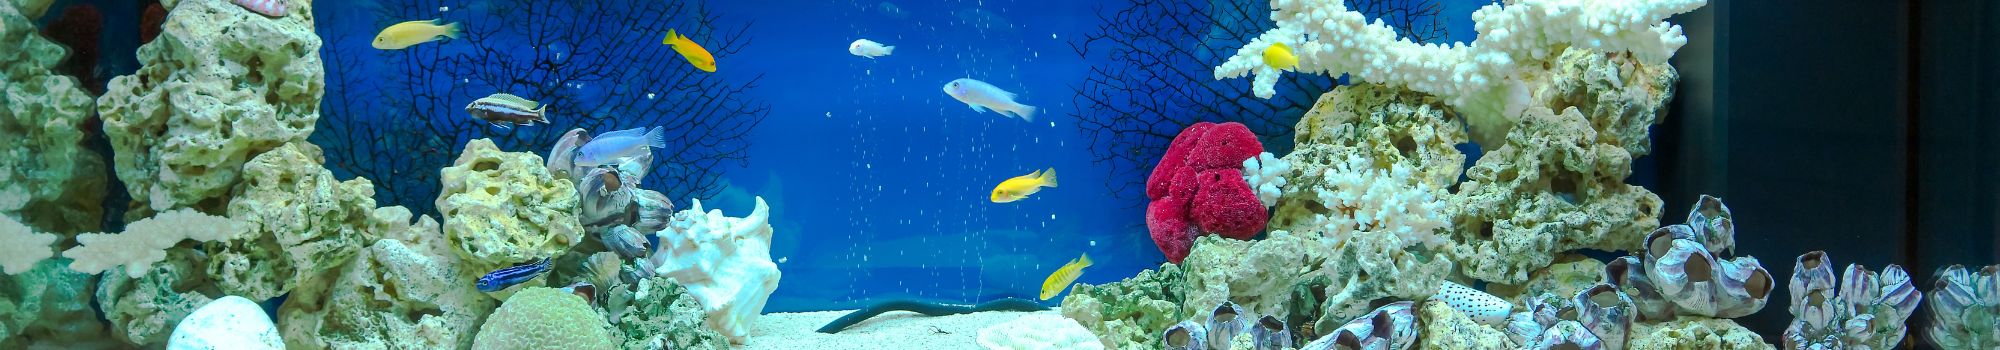 How to Upgrade an Aquarium and Prepare it for Your Pet Fish